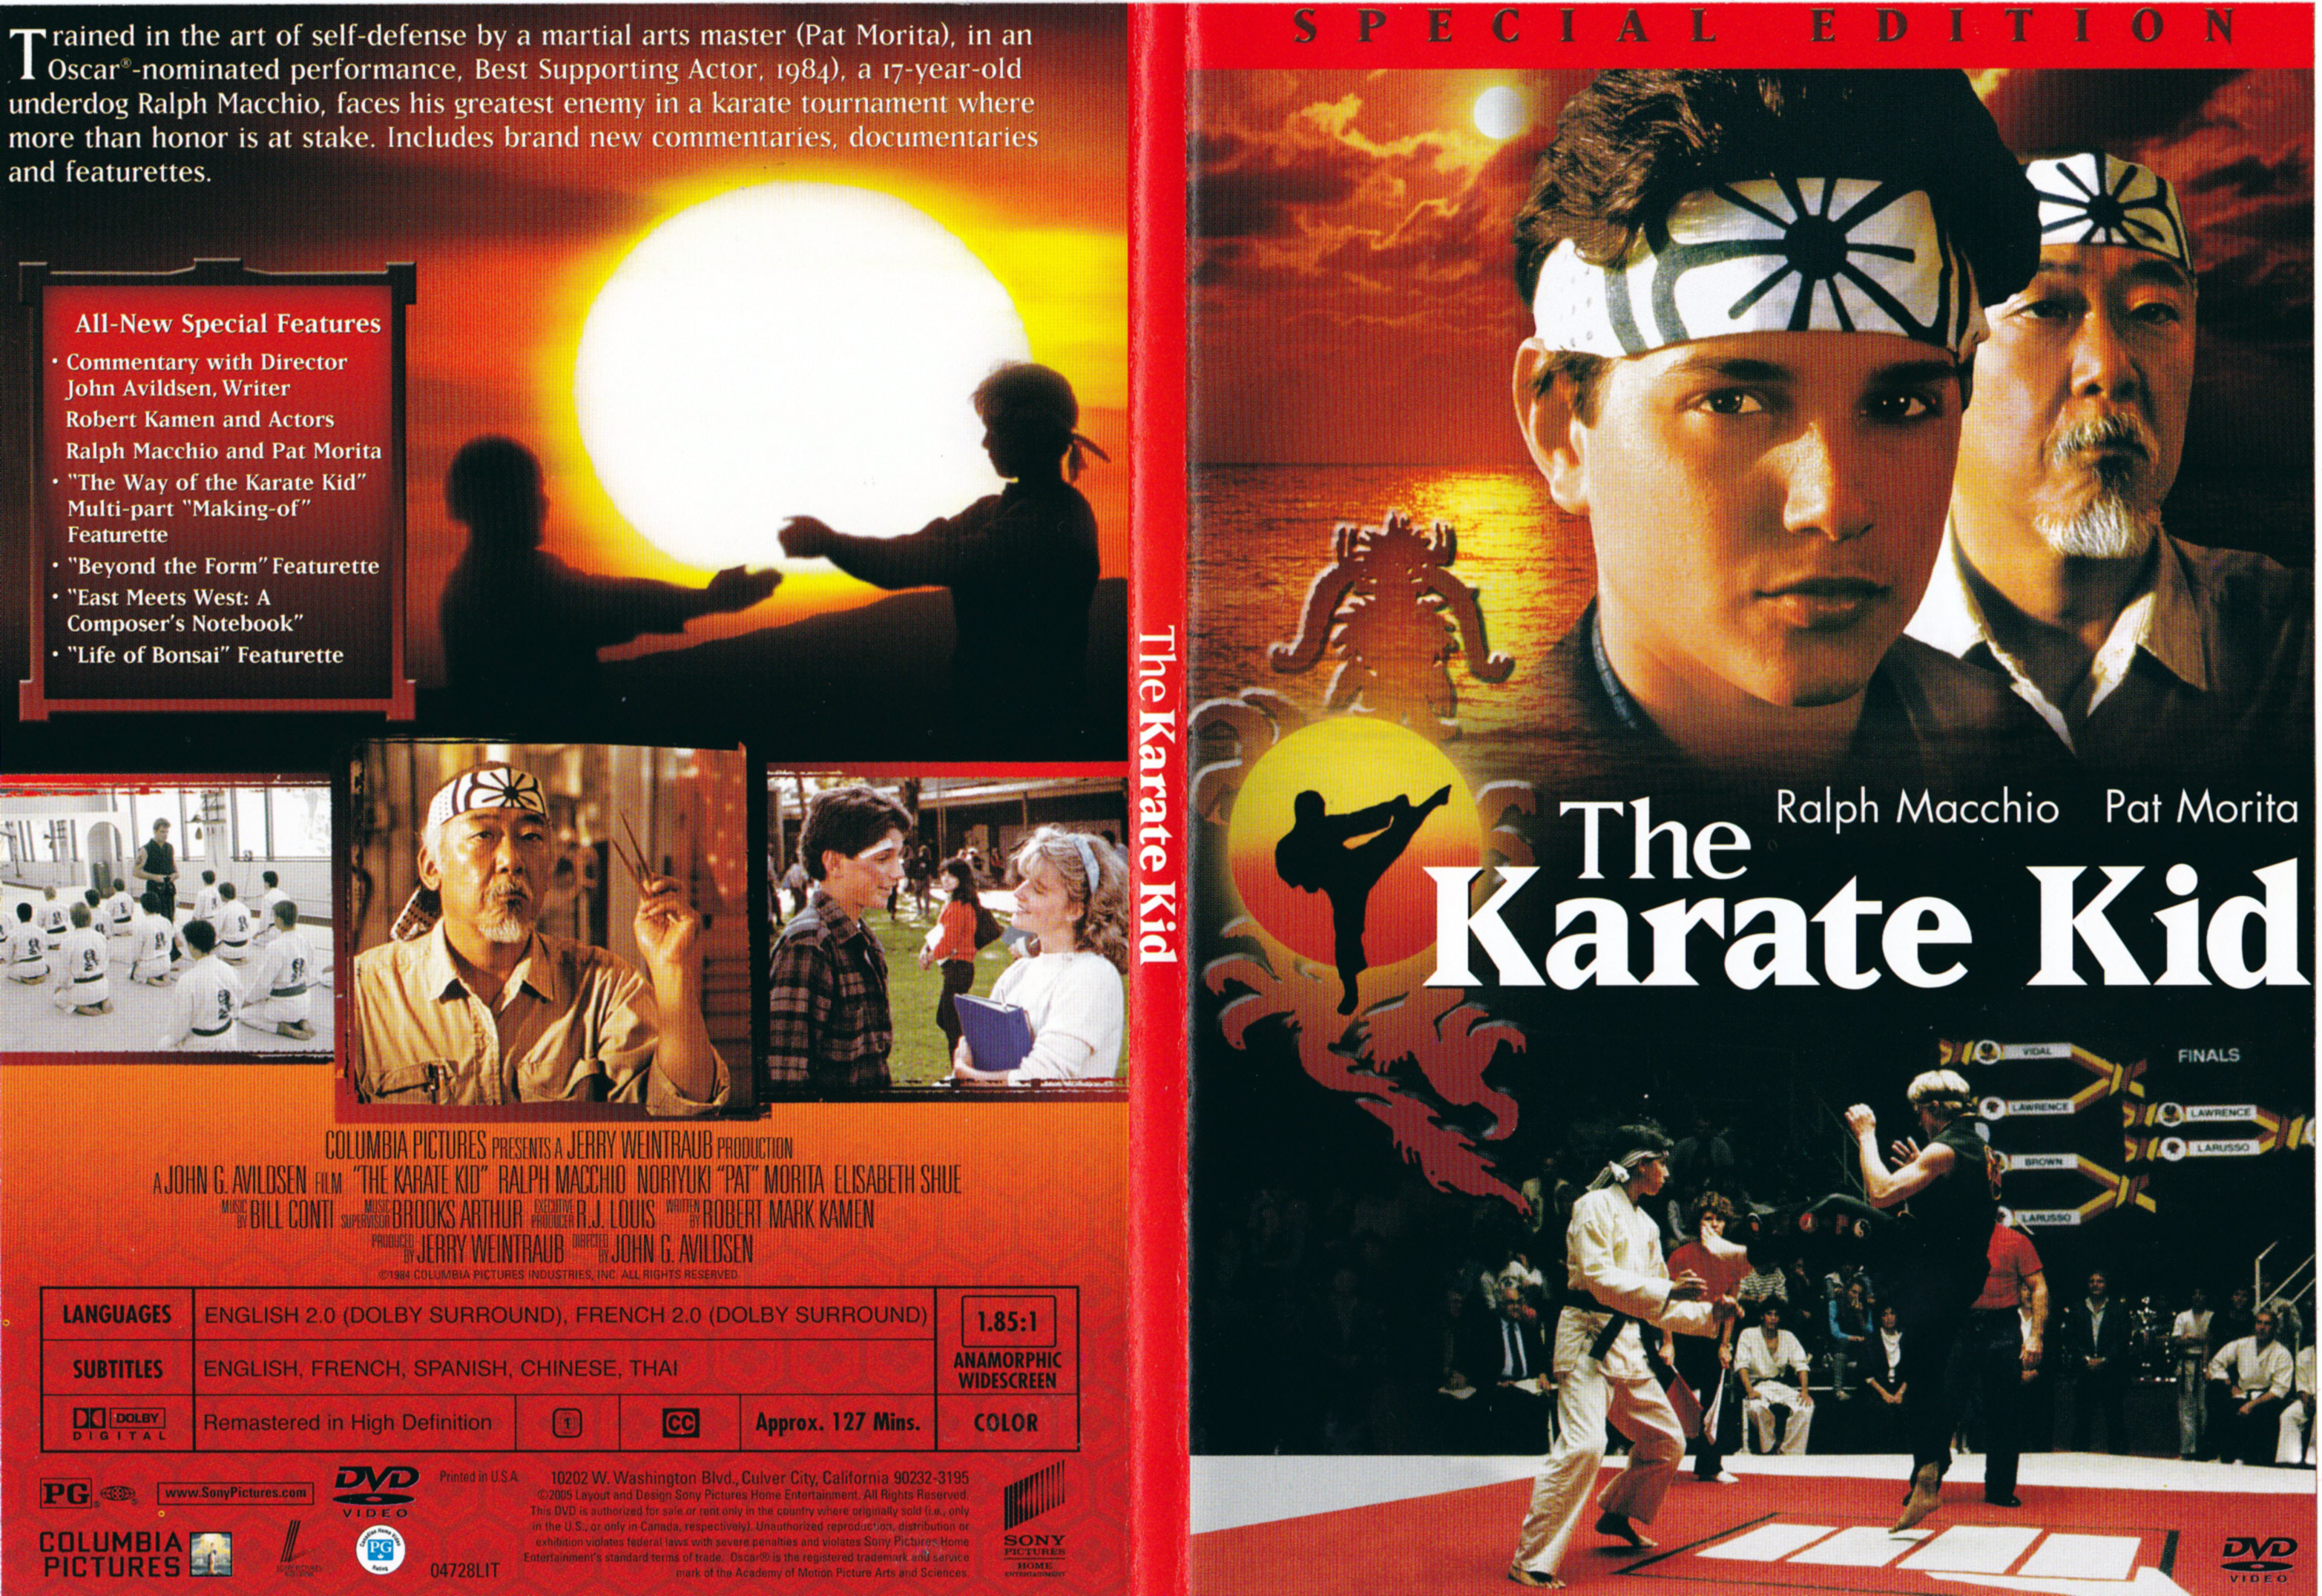 Jaquette DVD The karate kid (Canadienne)